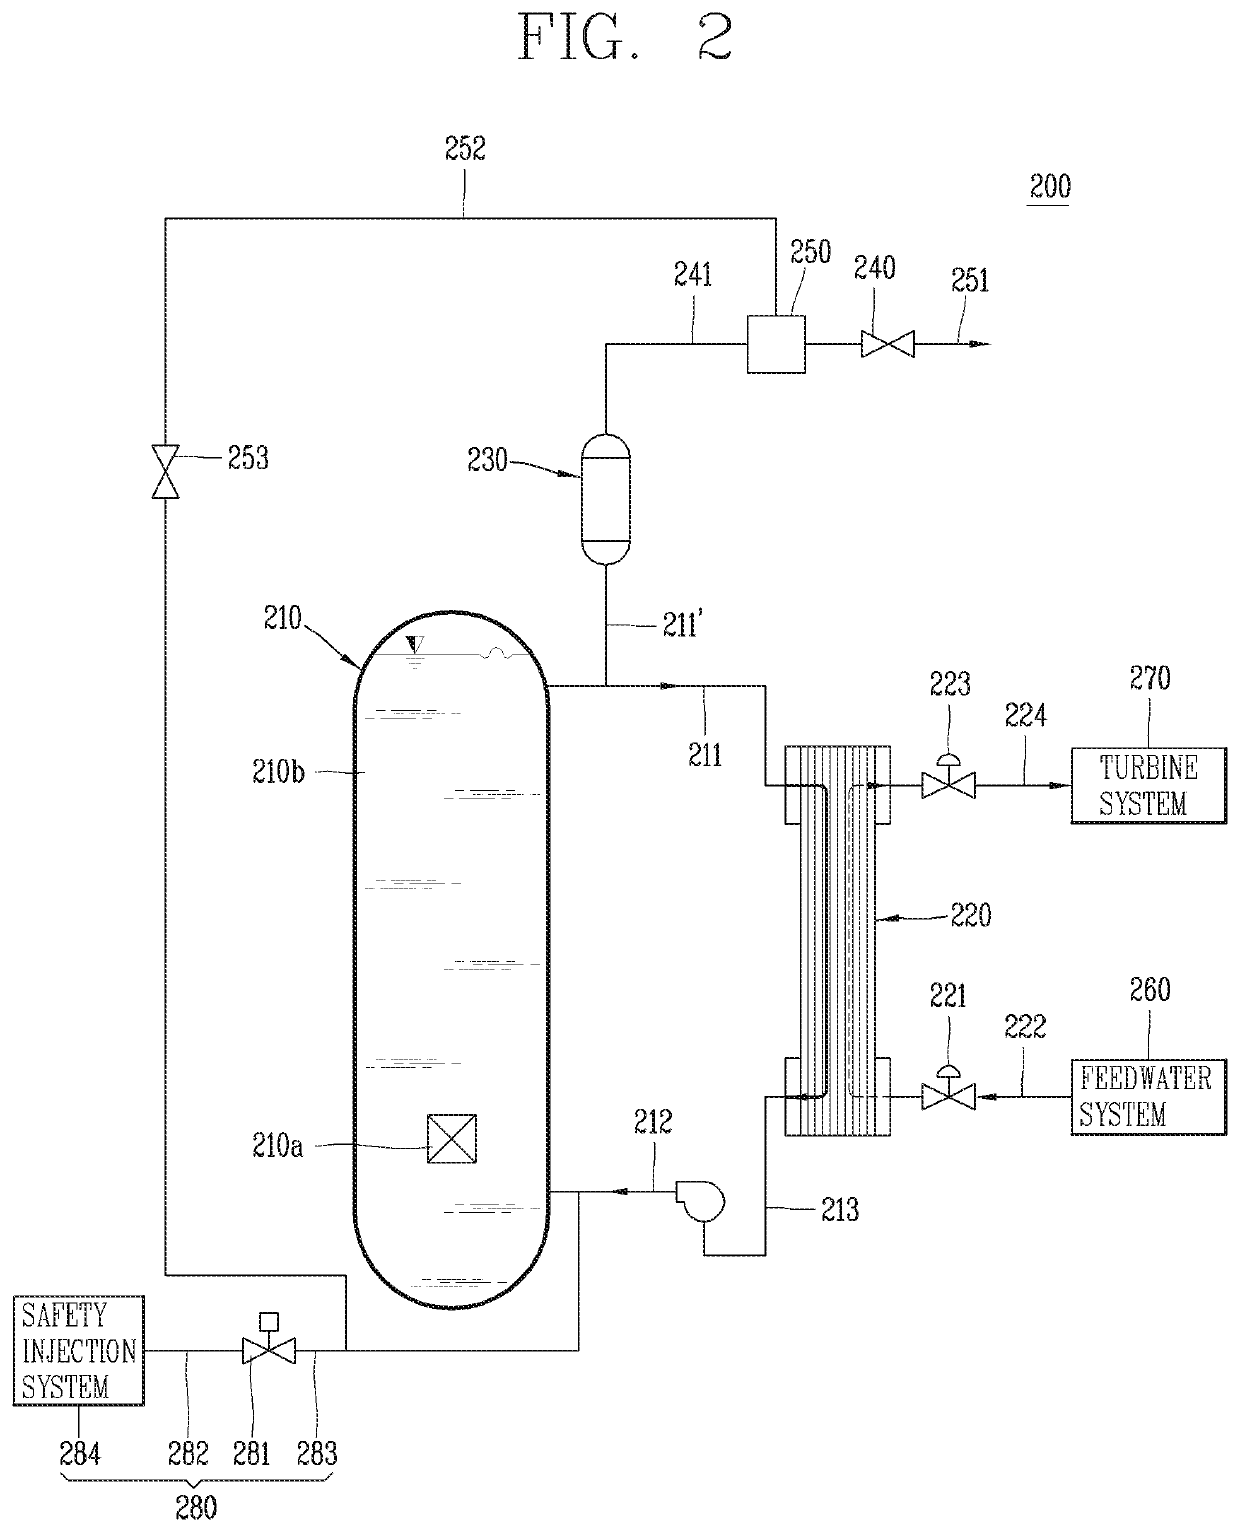 Coolant recirculation system of nuclear power plant